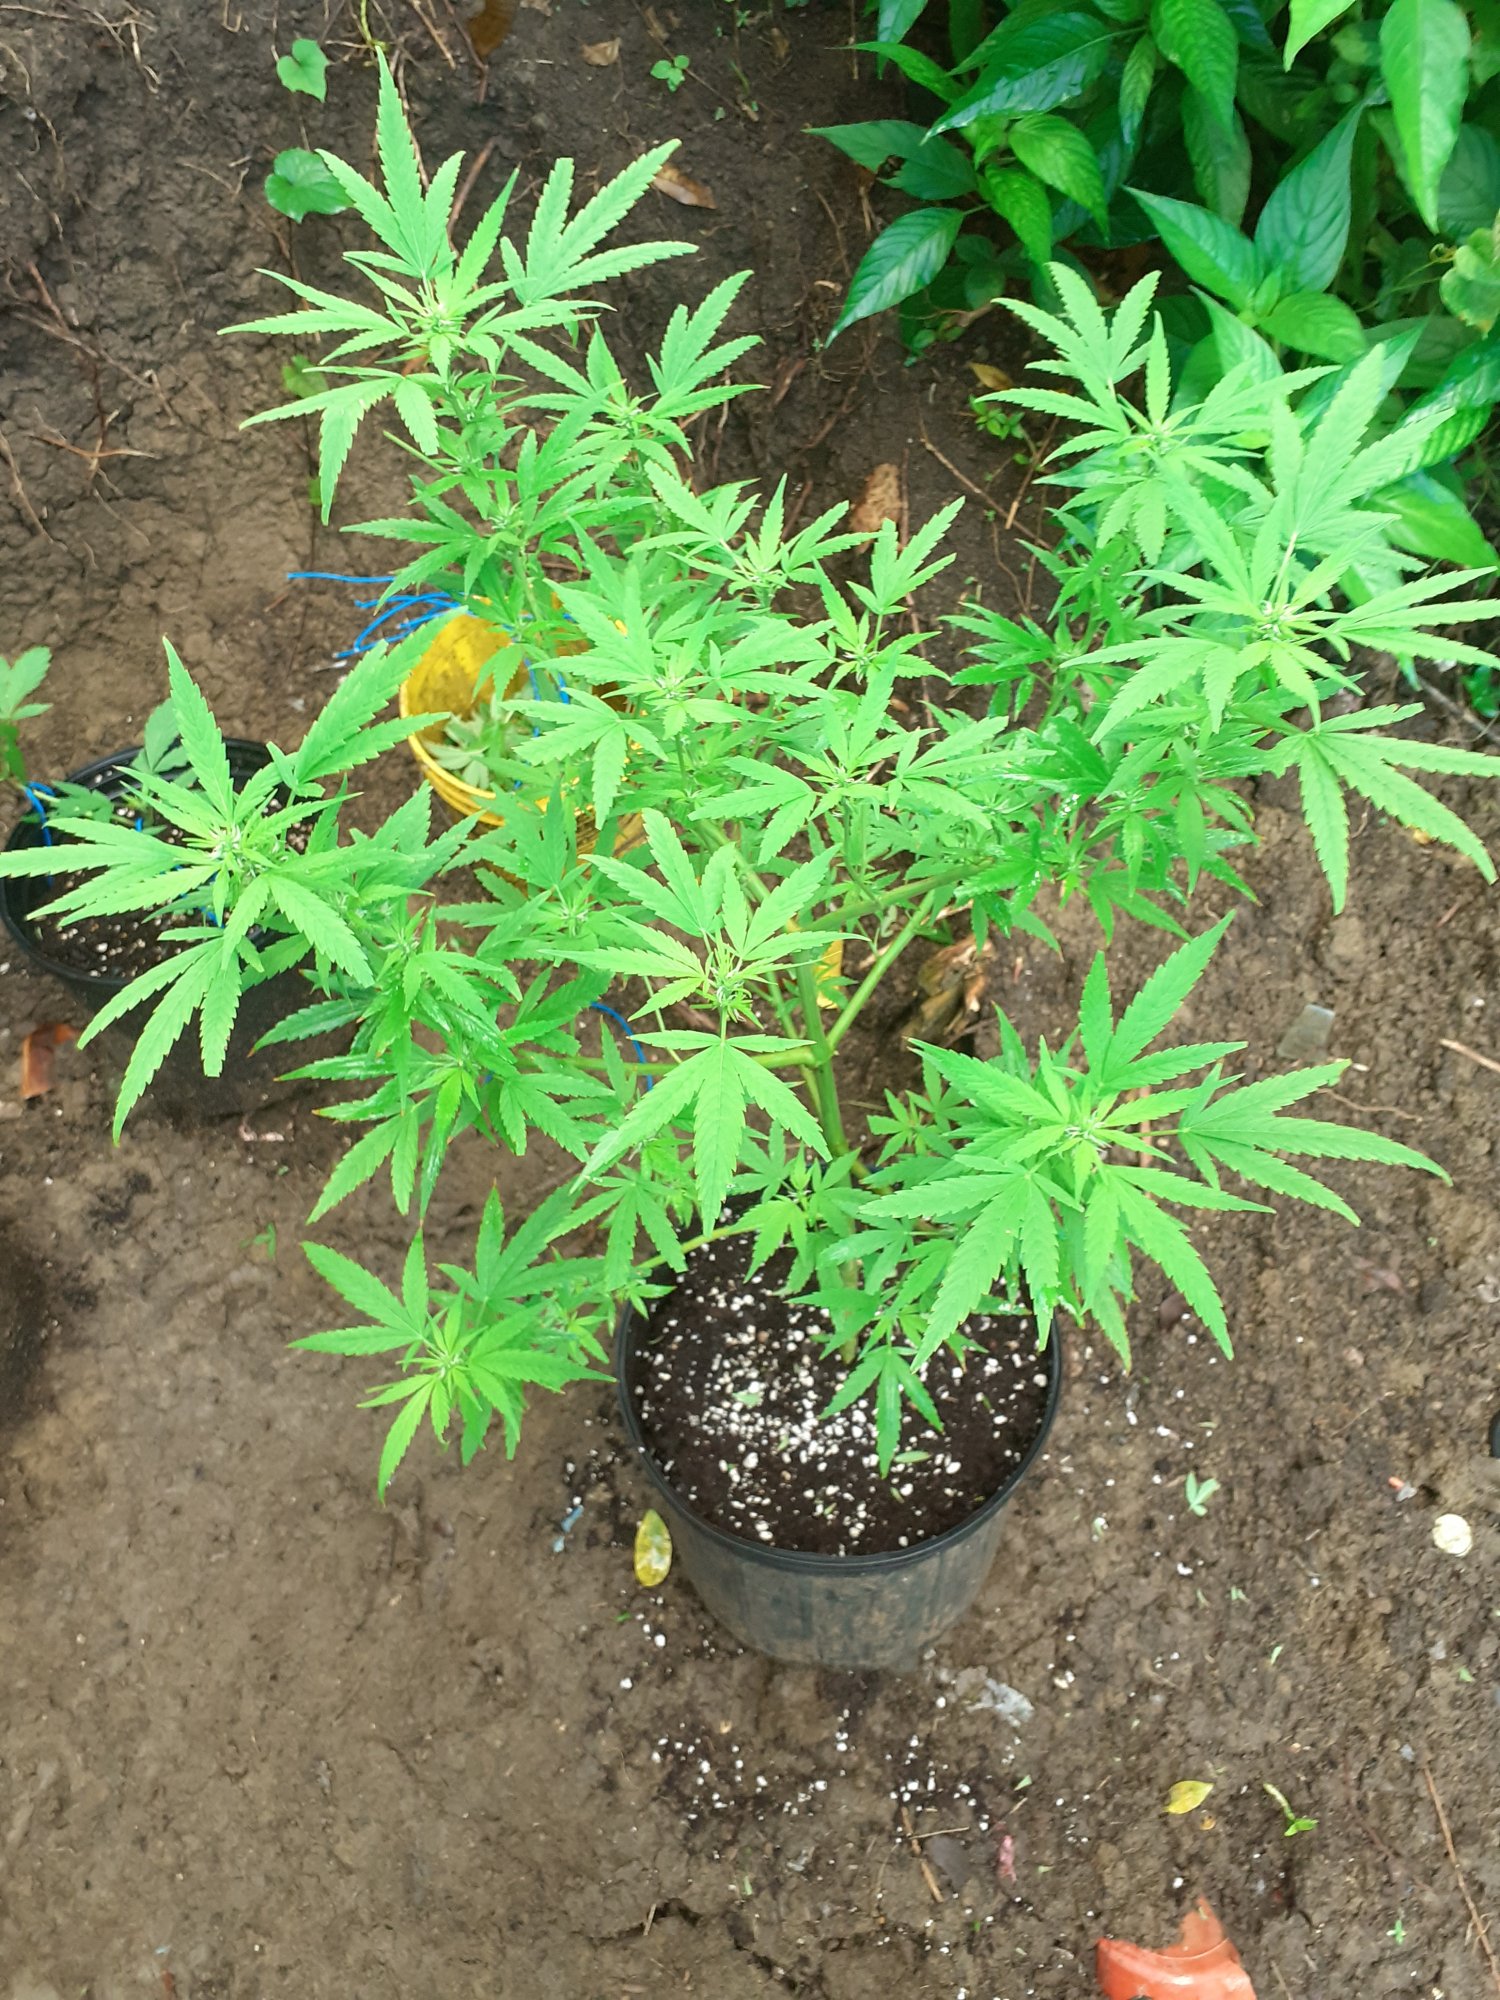 This is my first time growing marijuana 6